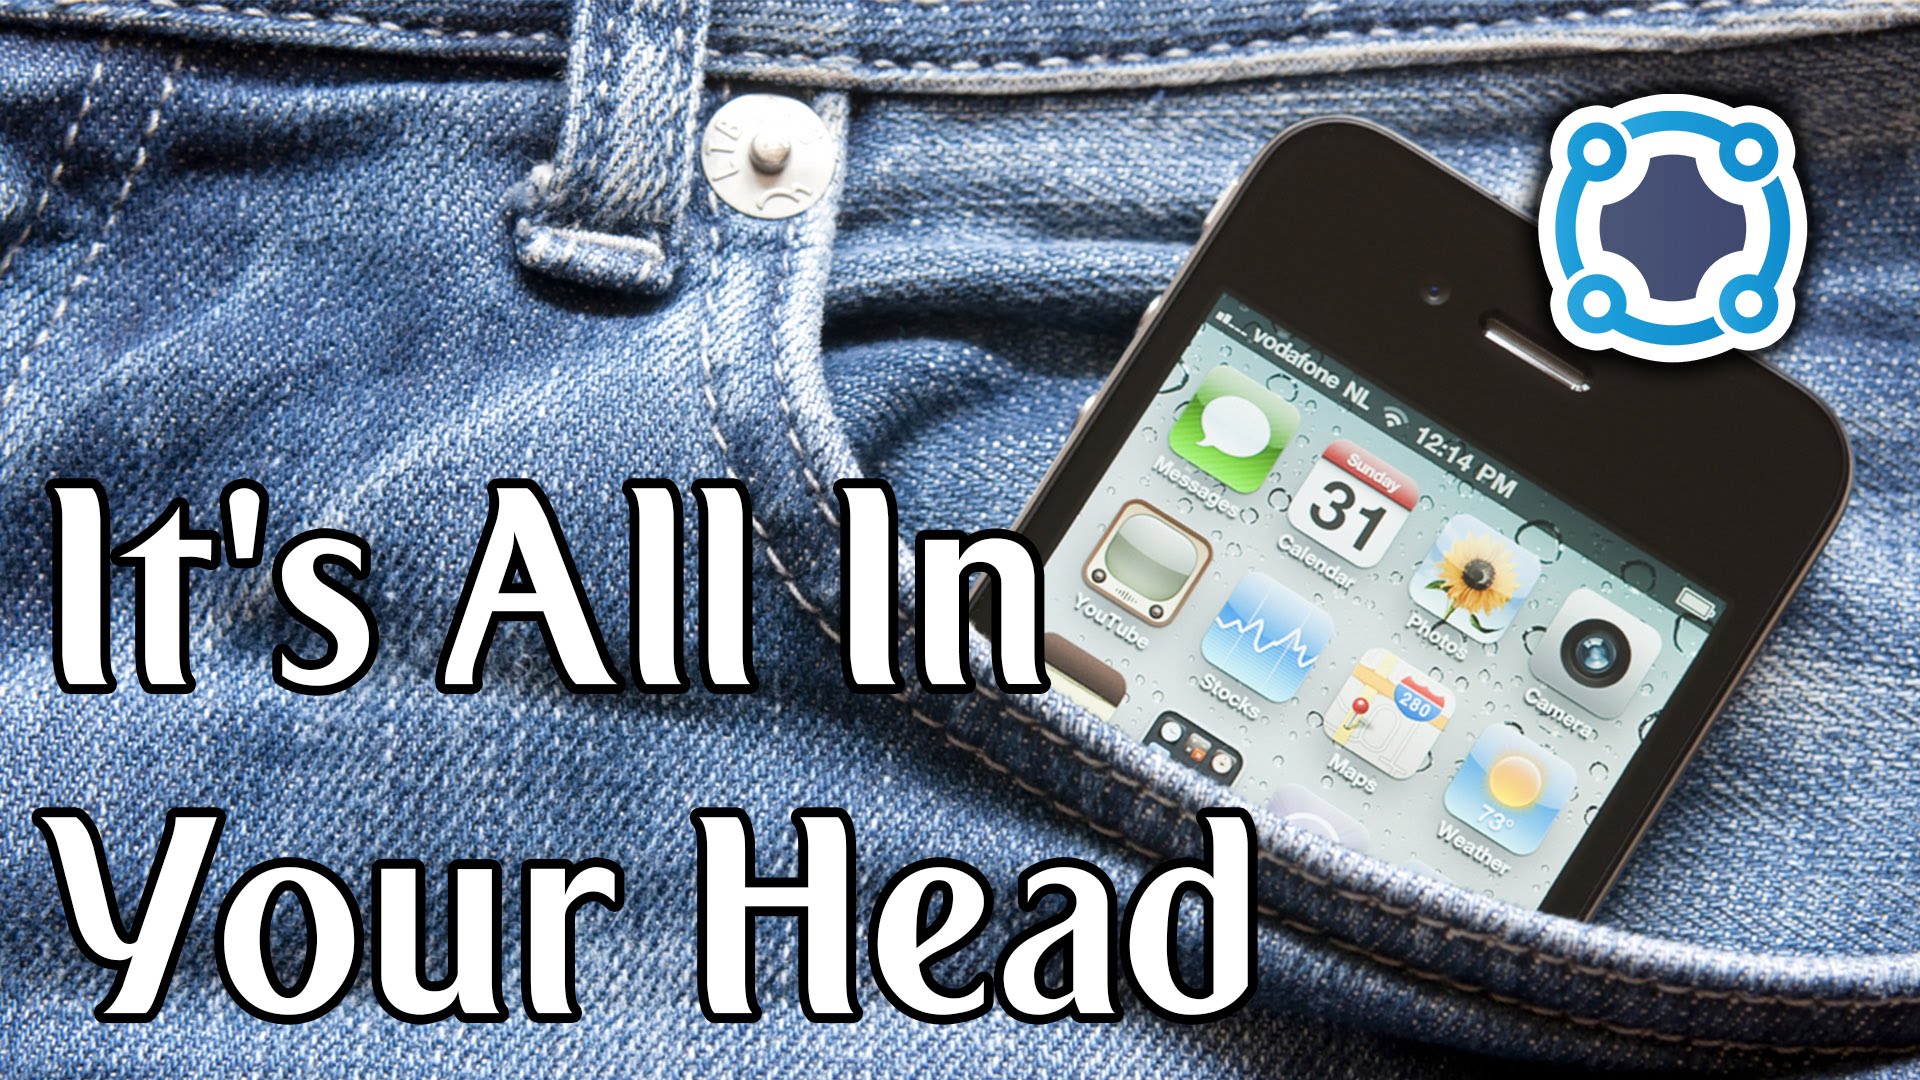 Phantom Vibration Syndrome - Ever Feel Like Your Phone's Vibrating, But It Really Isn't?